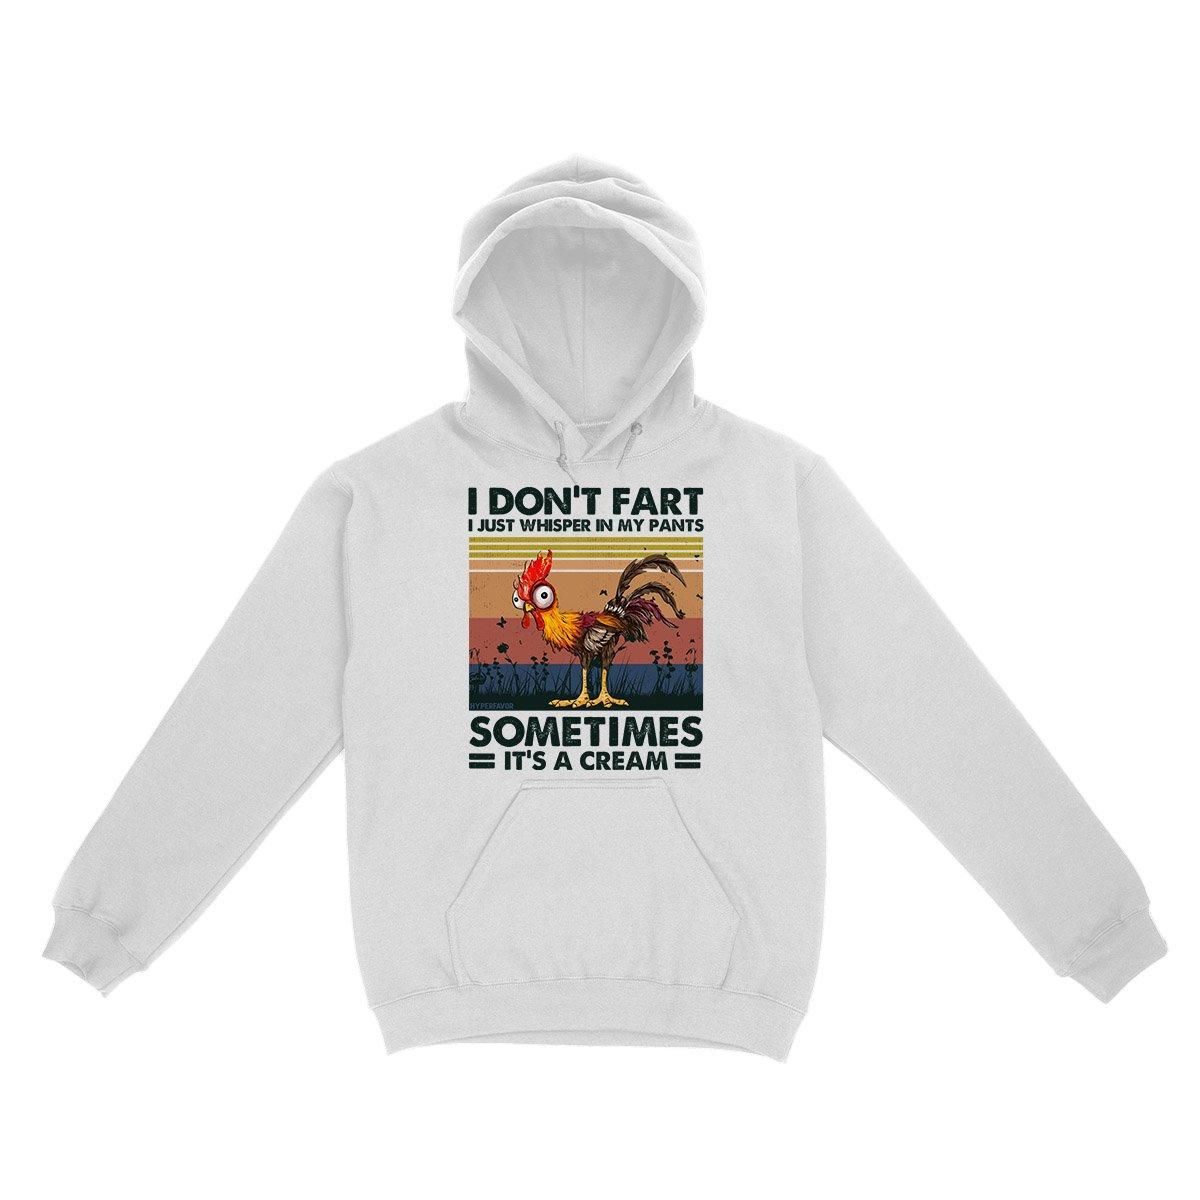 I don' fart i just whisper in my pants EZ03 0704 Hoodie